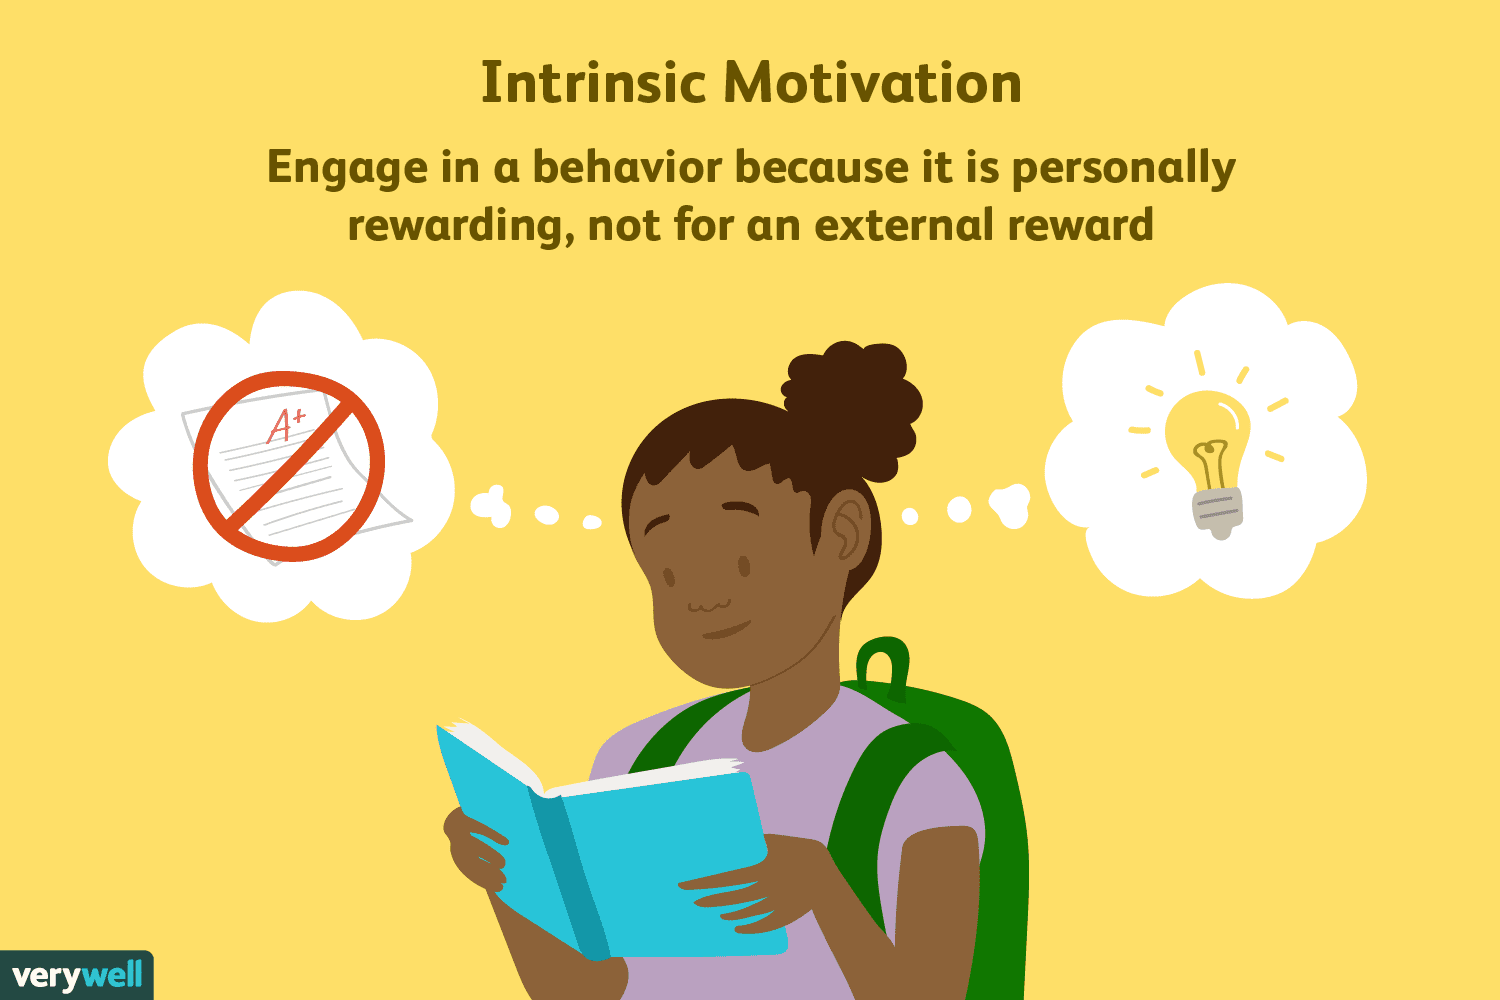 What Does Intrinsic Motivation Mean?